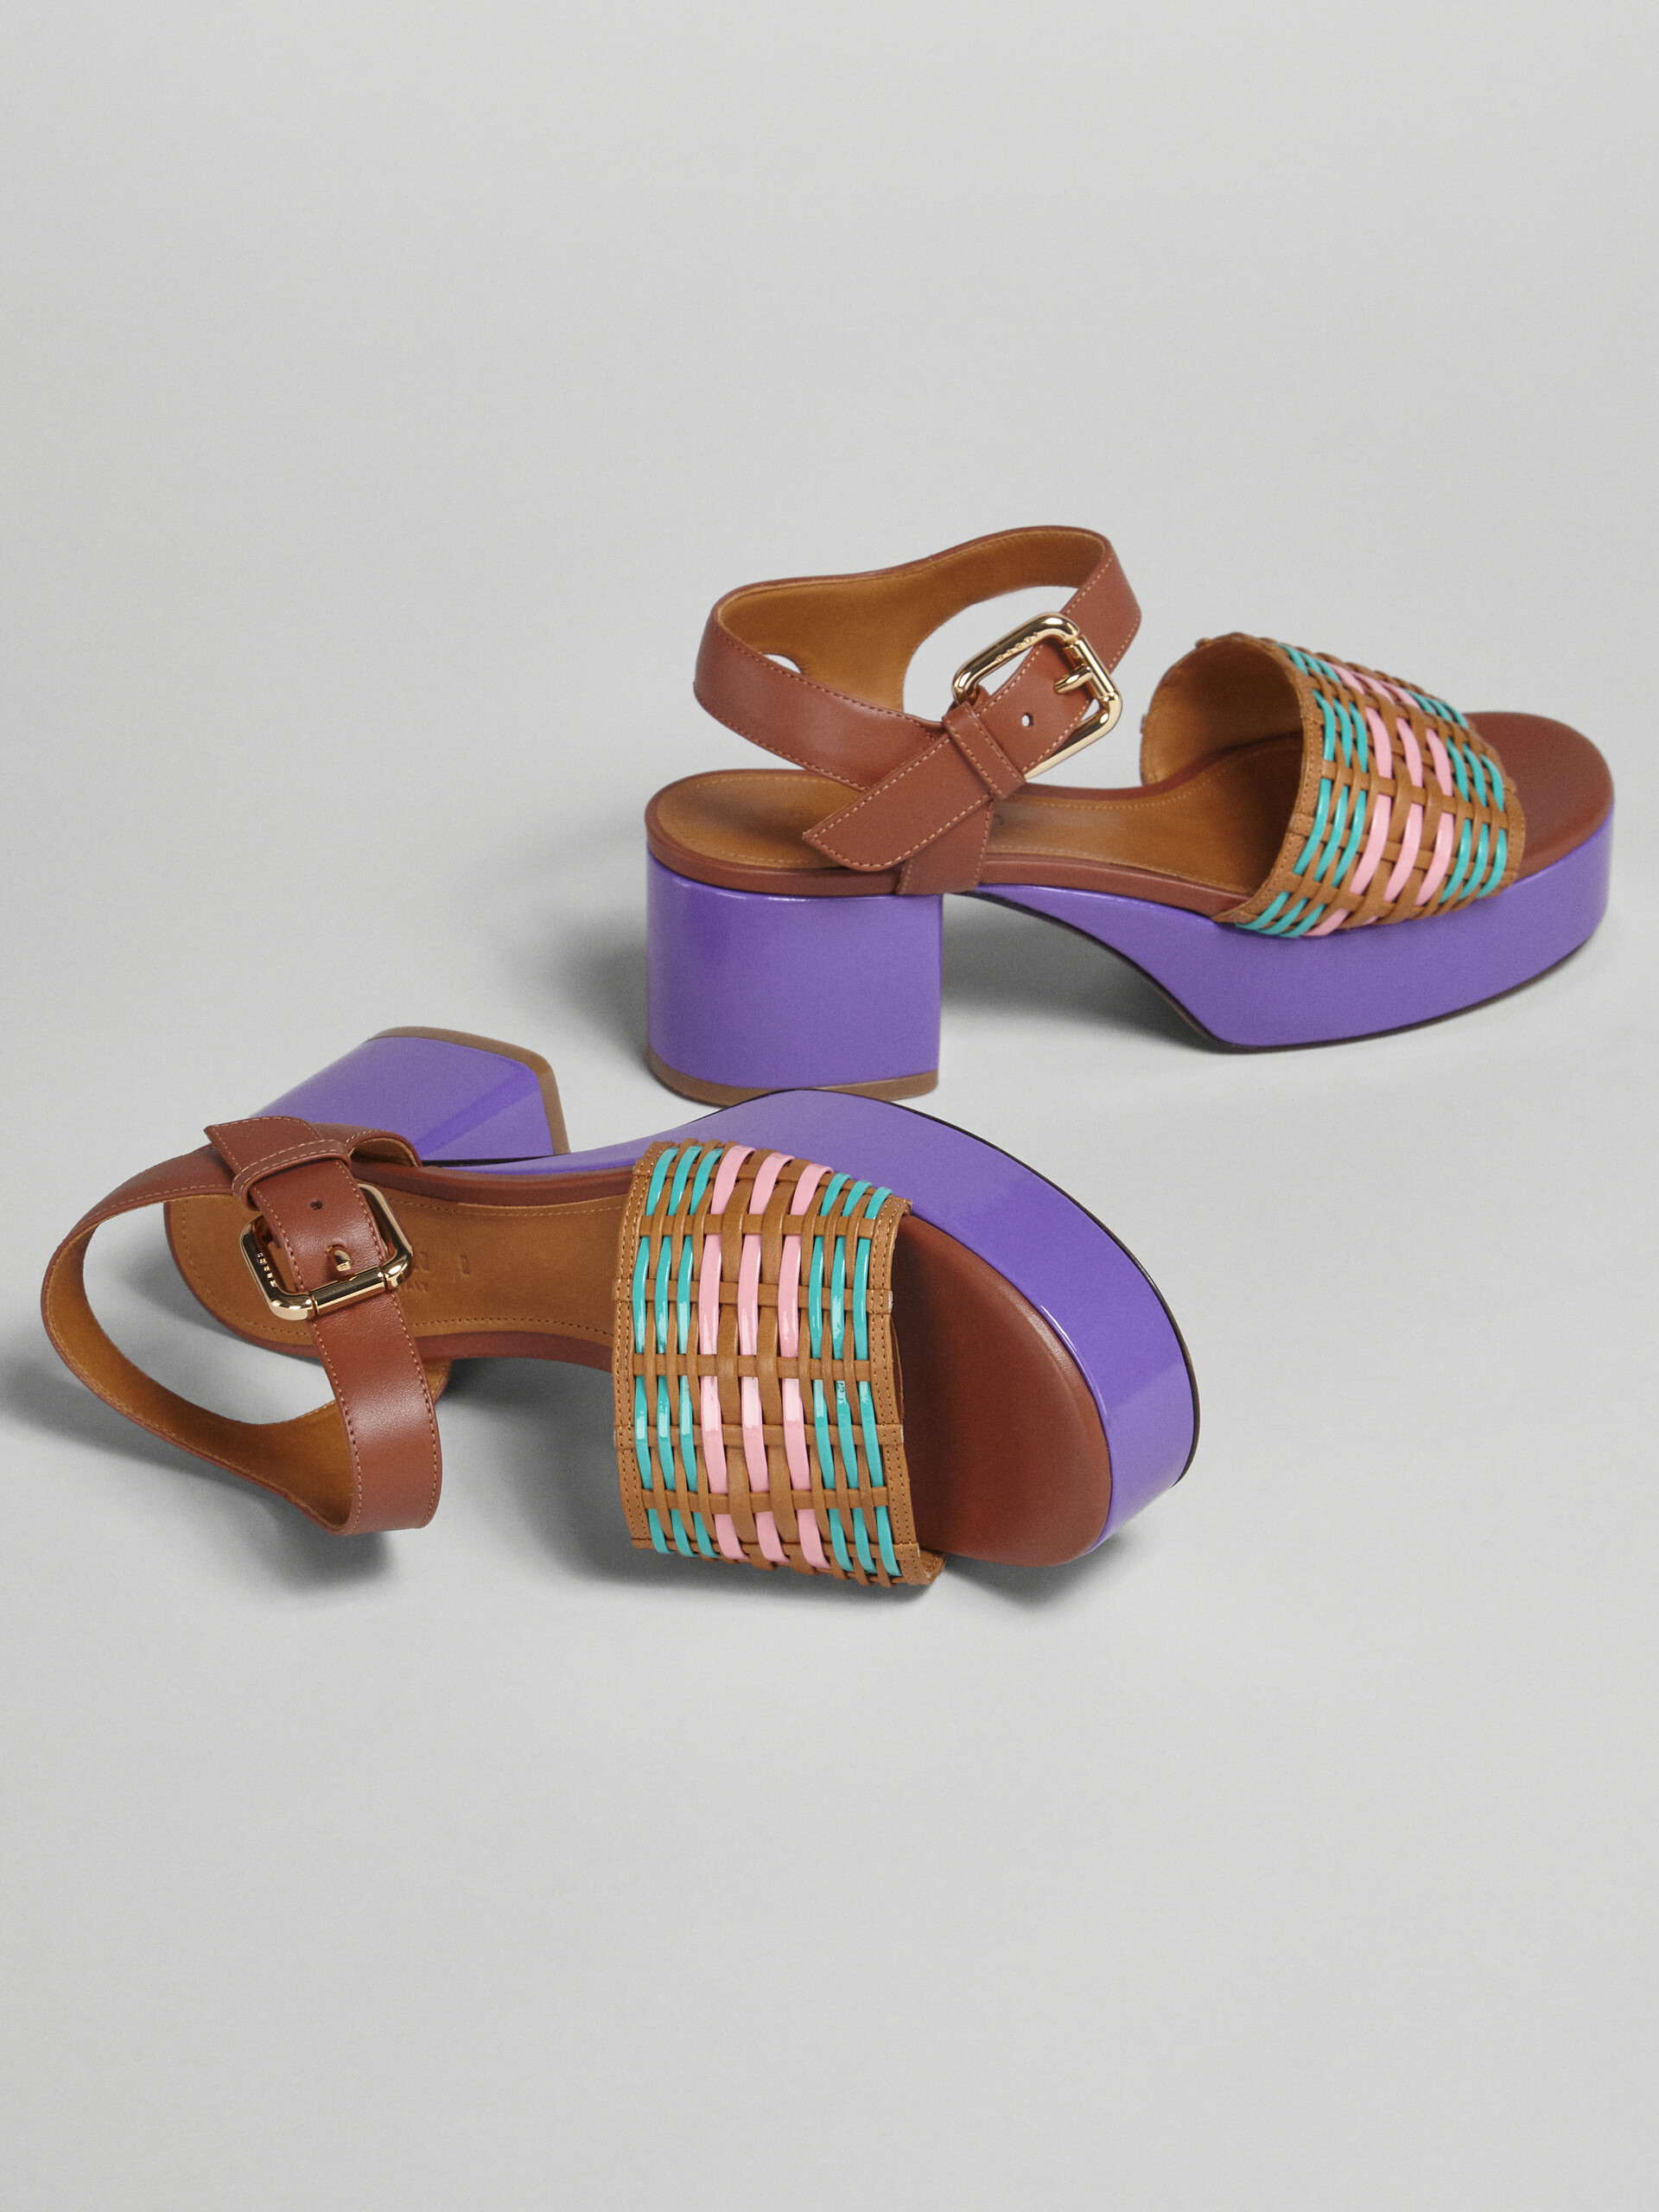 Hand woven vegetable-tanned leather sandal - Sandals - Image 5